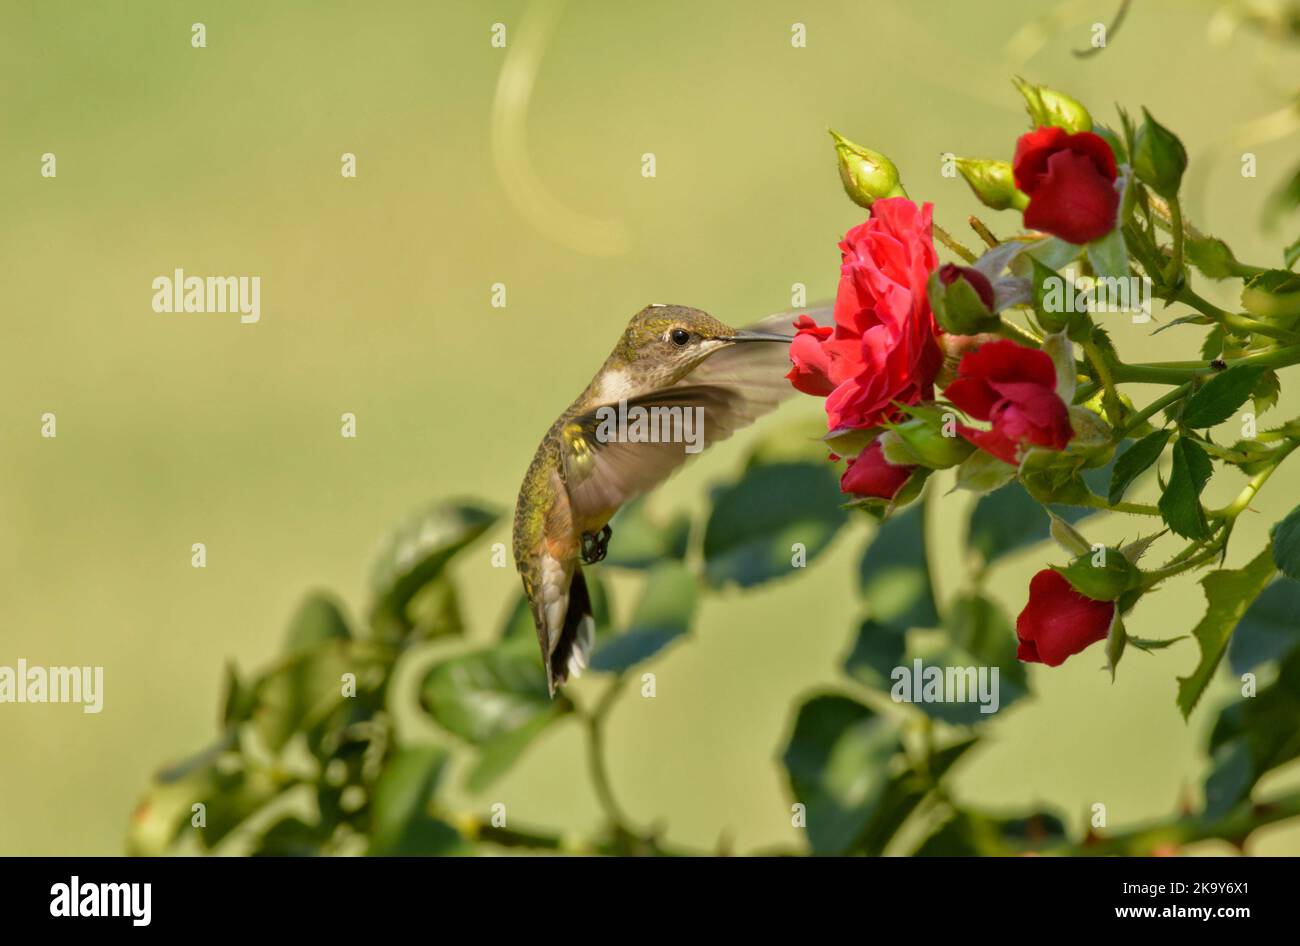 Ruby-throated Hummingbird feeding on a red rose in summer garden Stock Photo